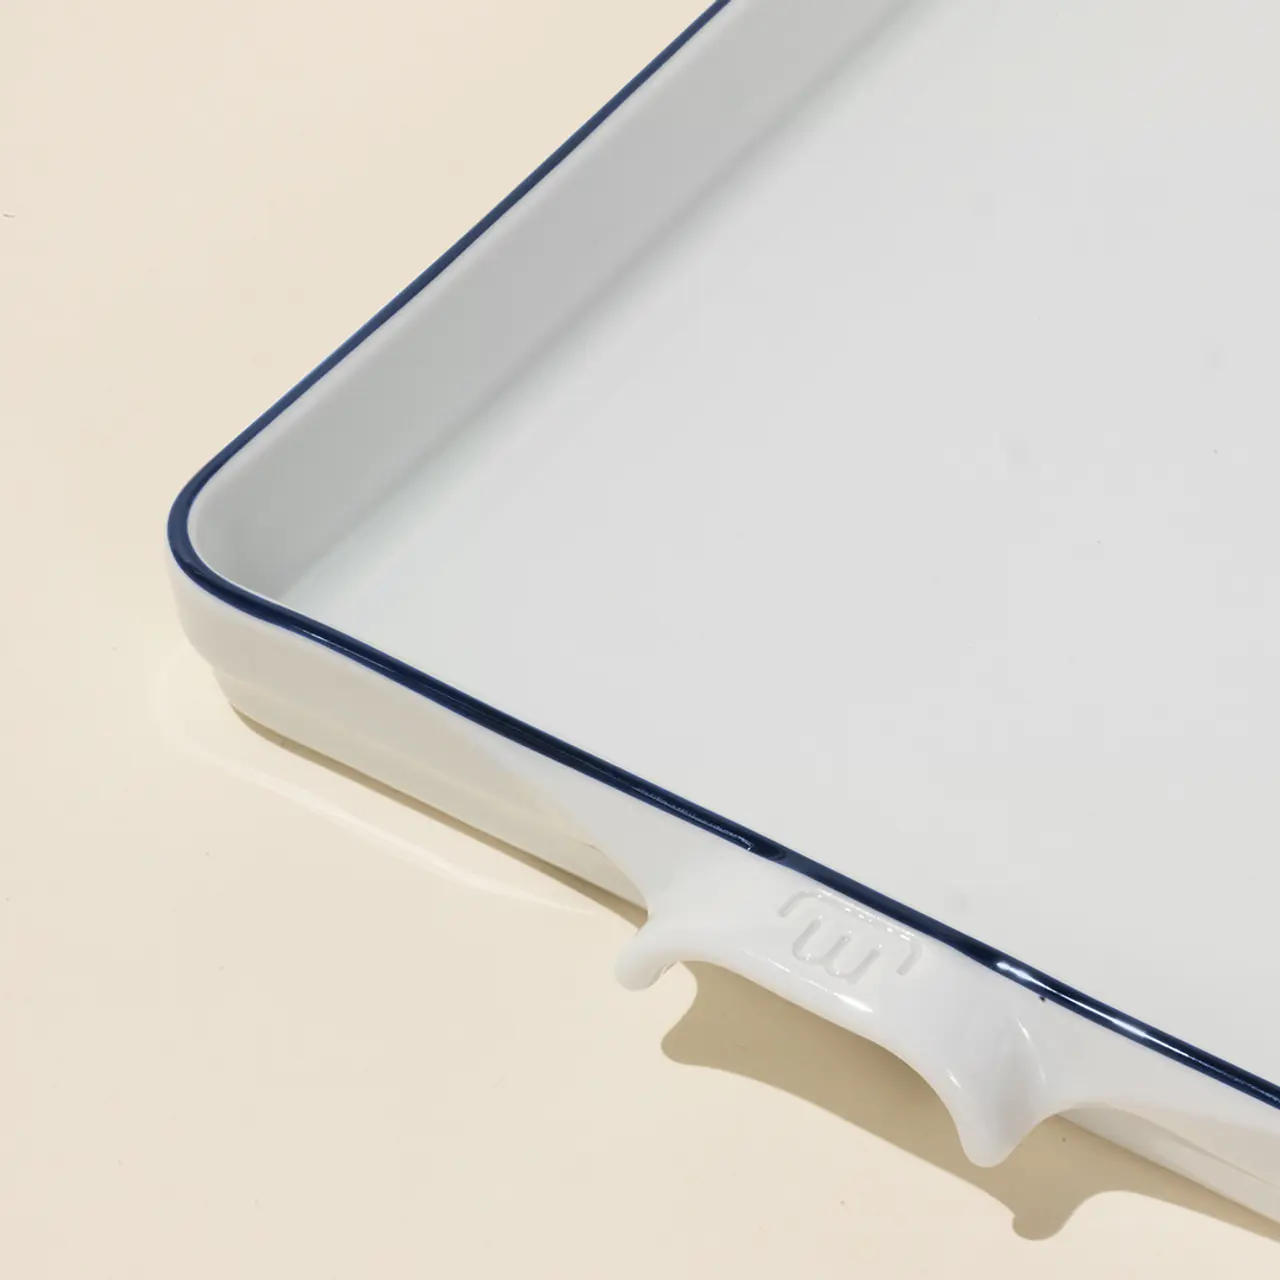 A close-up of a white rectangular ceramic dish with a blue rim on a pale background.